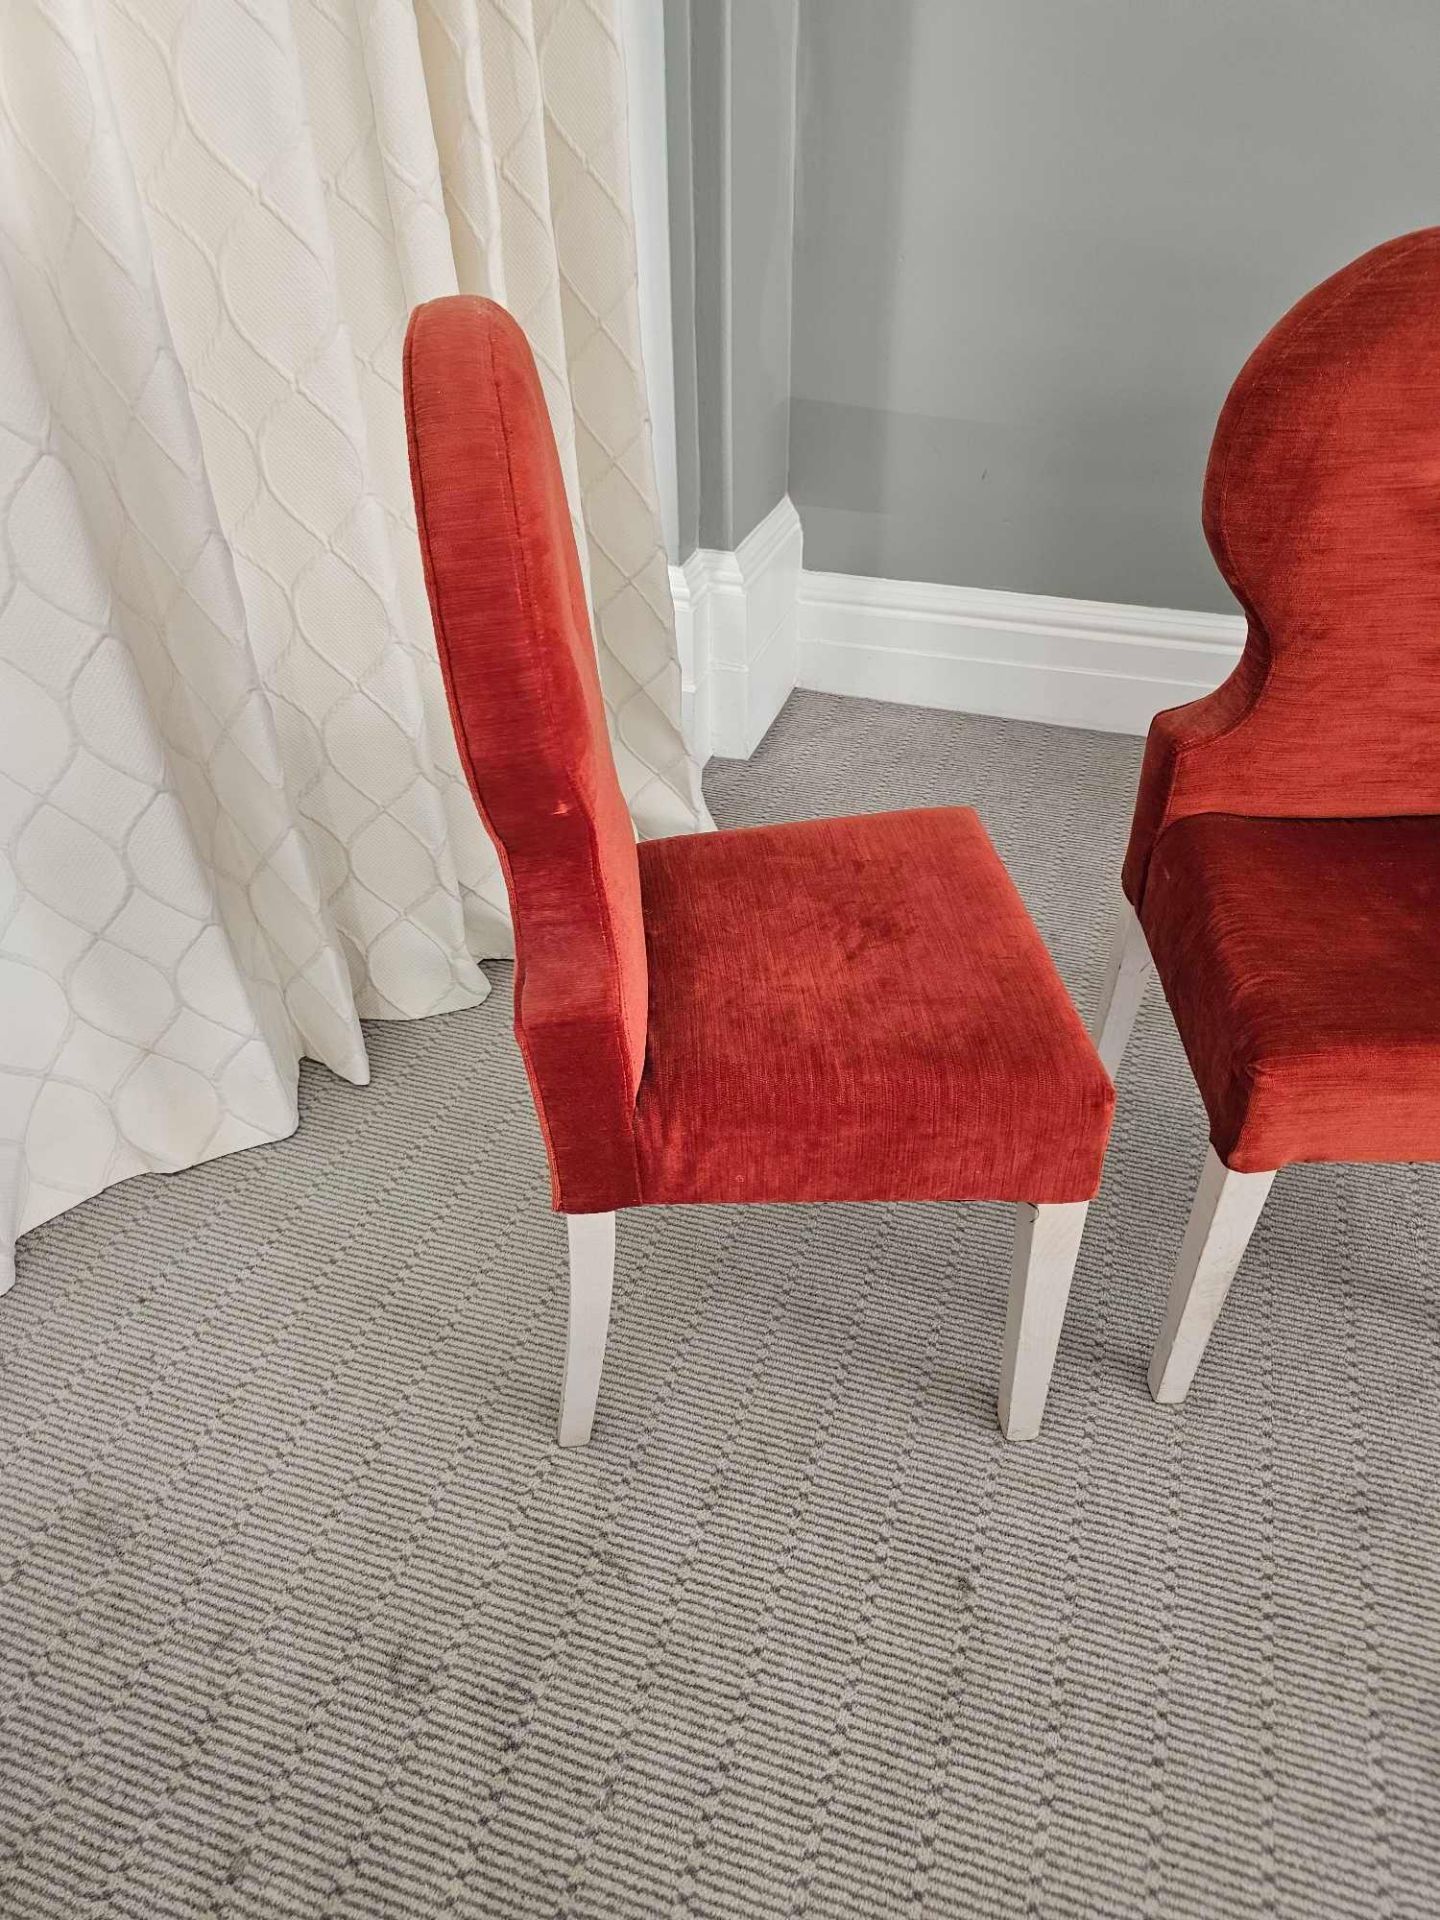 A Pair Of Chairs A Take On The Classic Spoonback Chair Features A Hardwood Frame Upholstered In A - Image 3 of 4